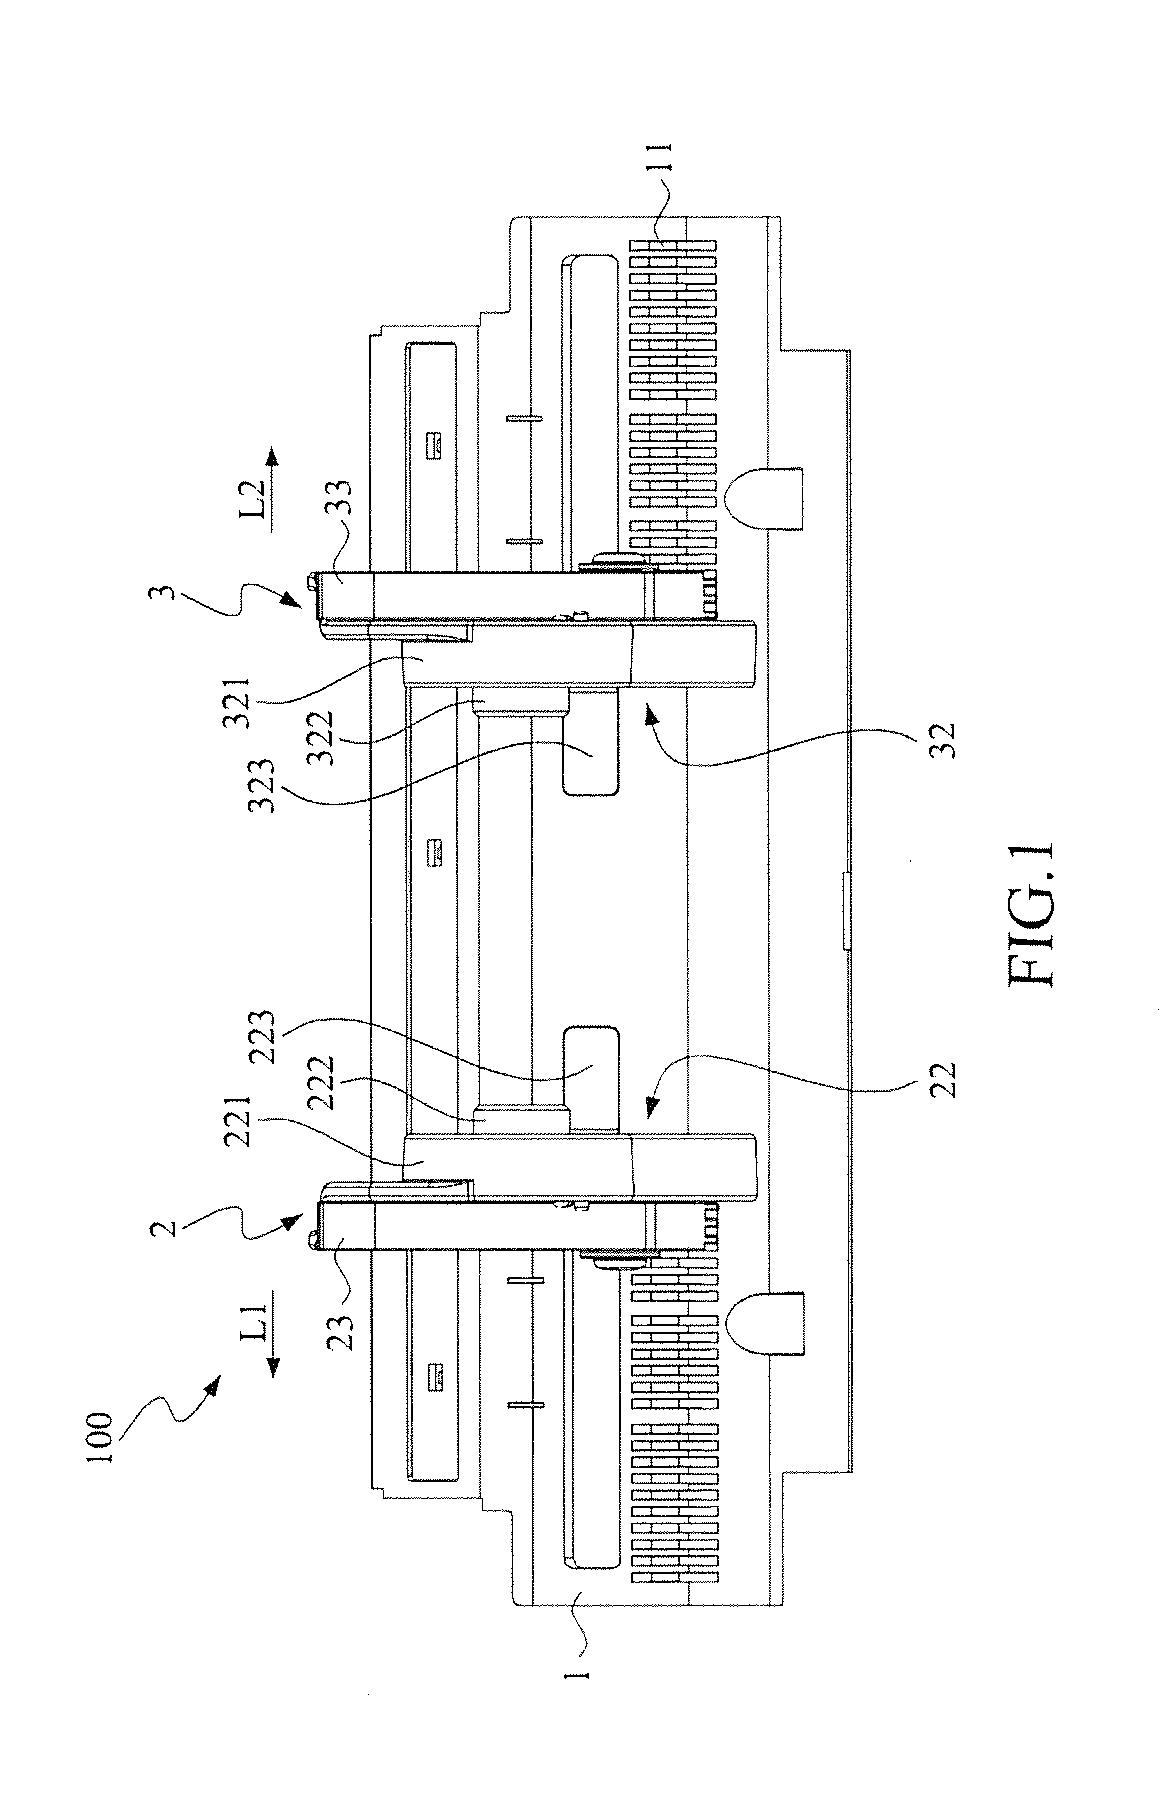 Device for positioning platen roller